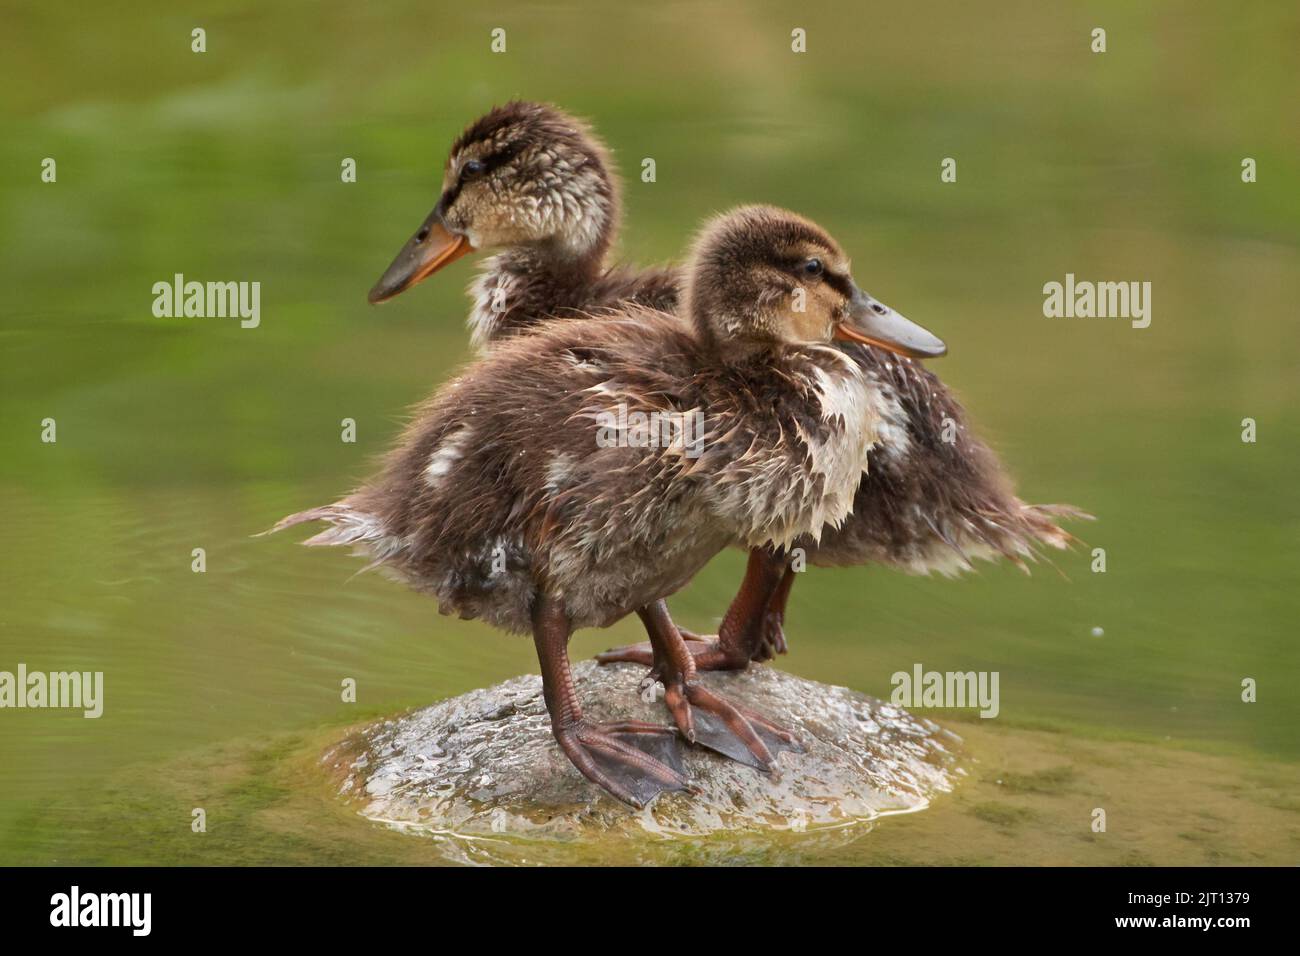 Two Mallard ducklings (Anas platyrhynchos) standing on small island in a lake with green water Stock Photo